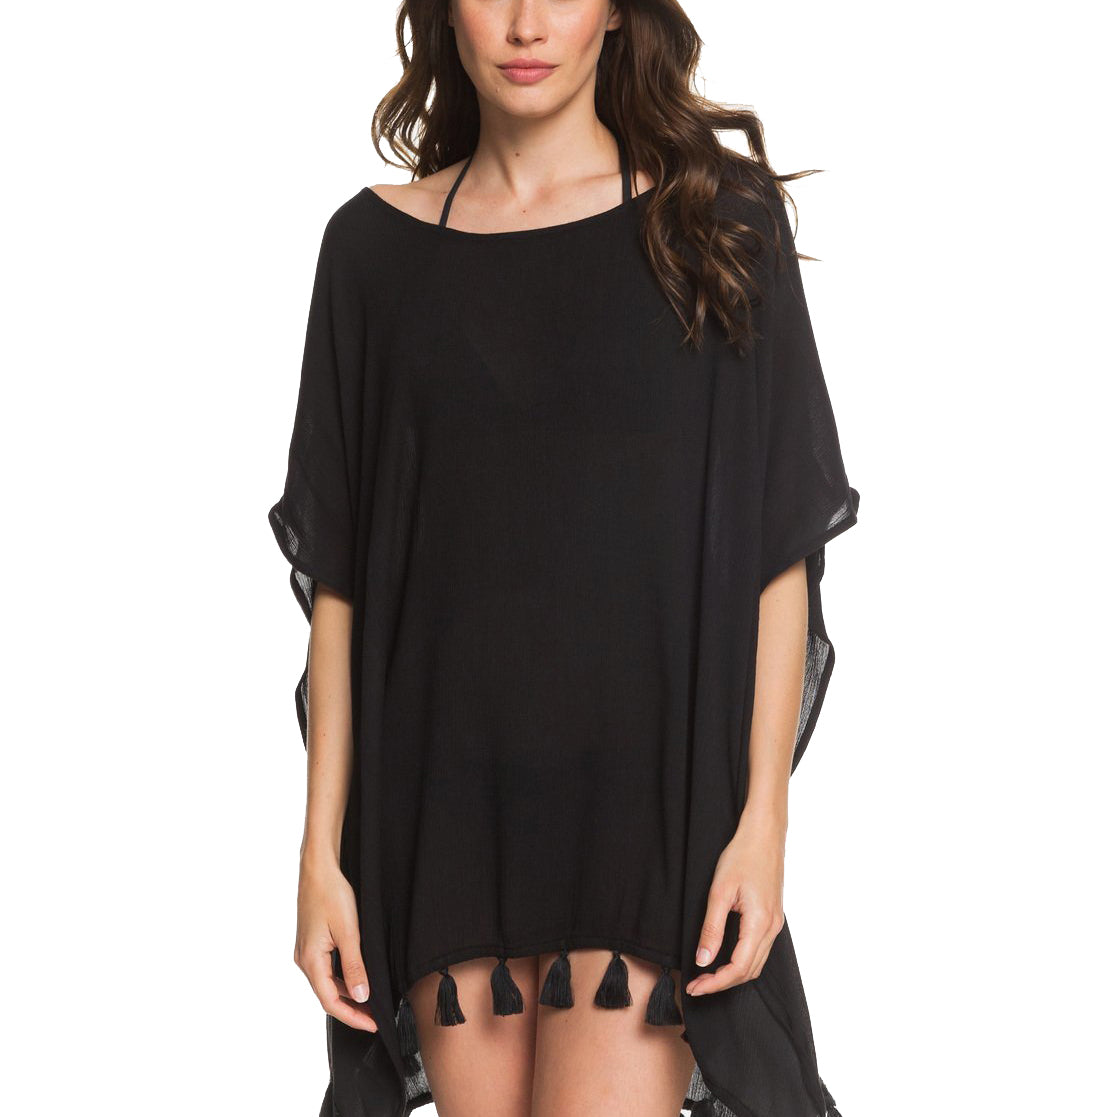 Roxy Make Your Soul Beach Cover-Up KVJ0 XS/S